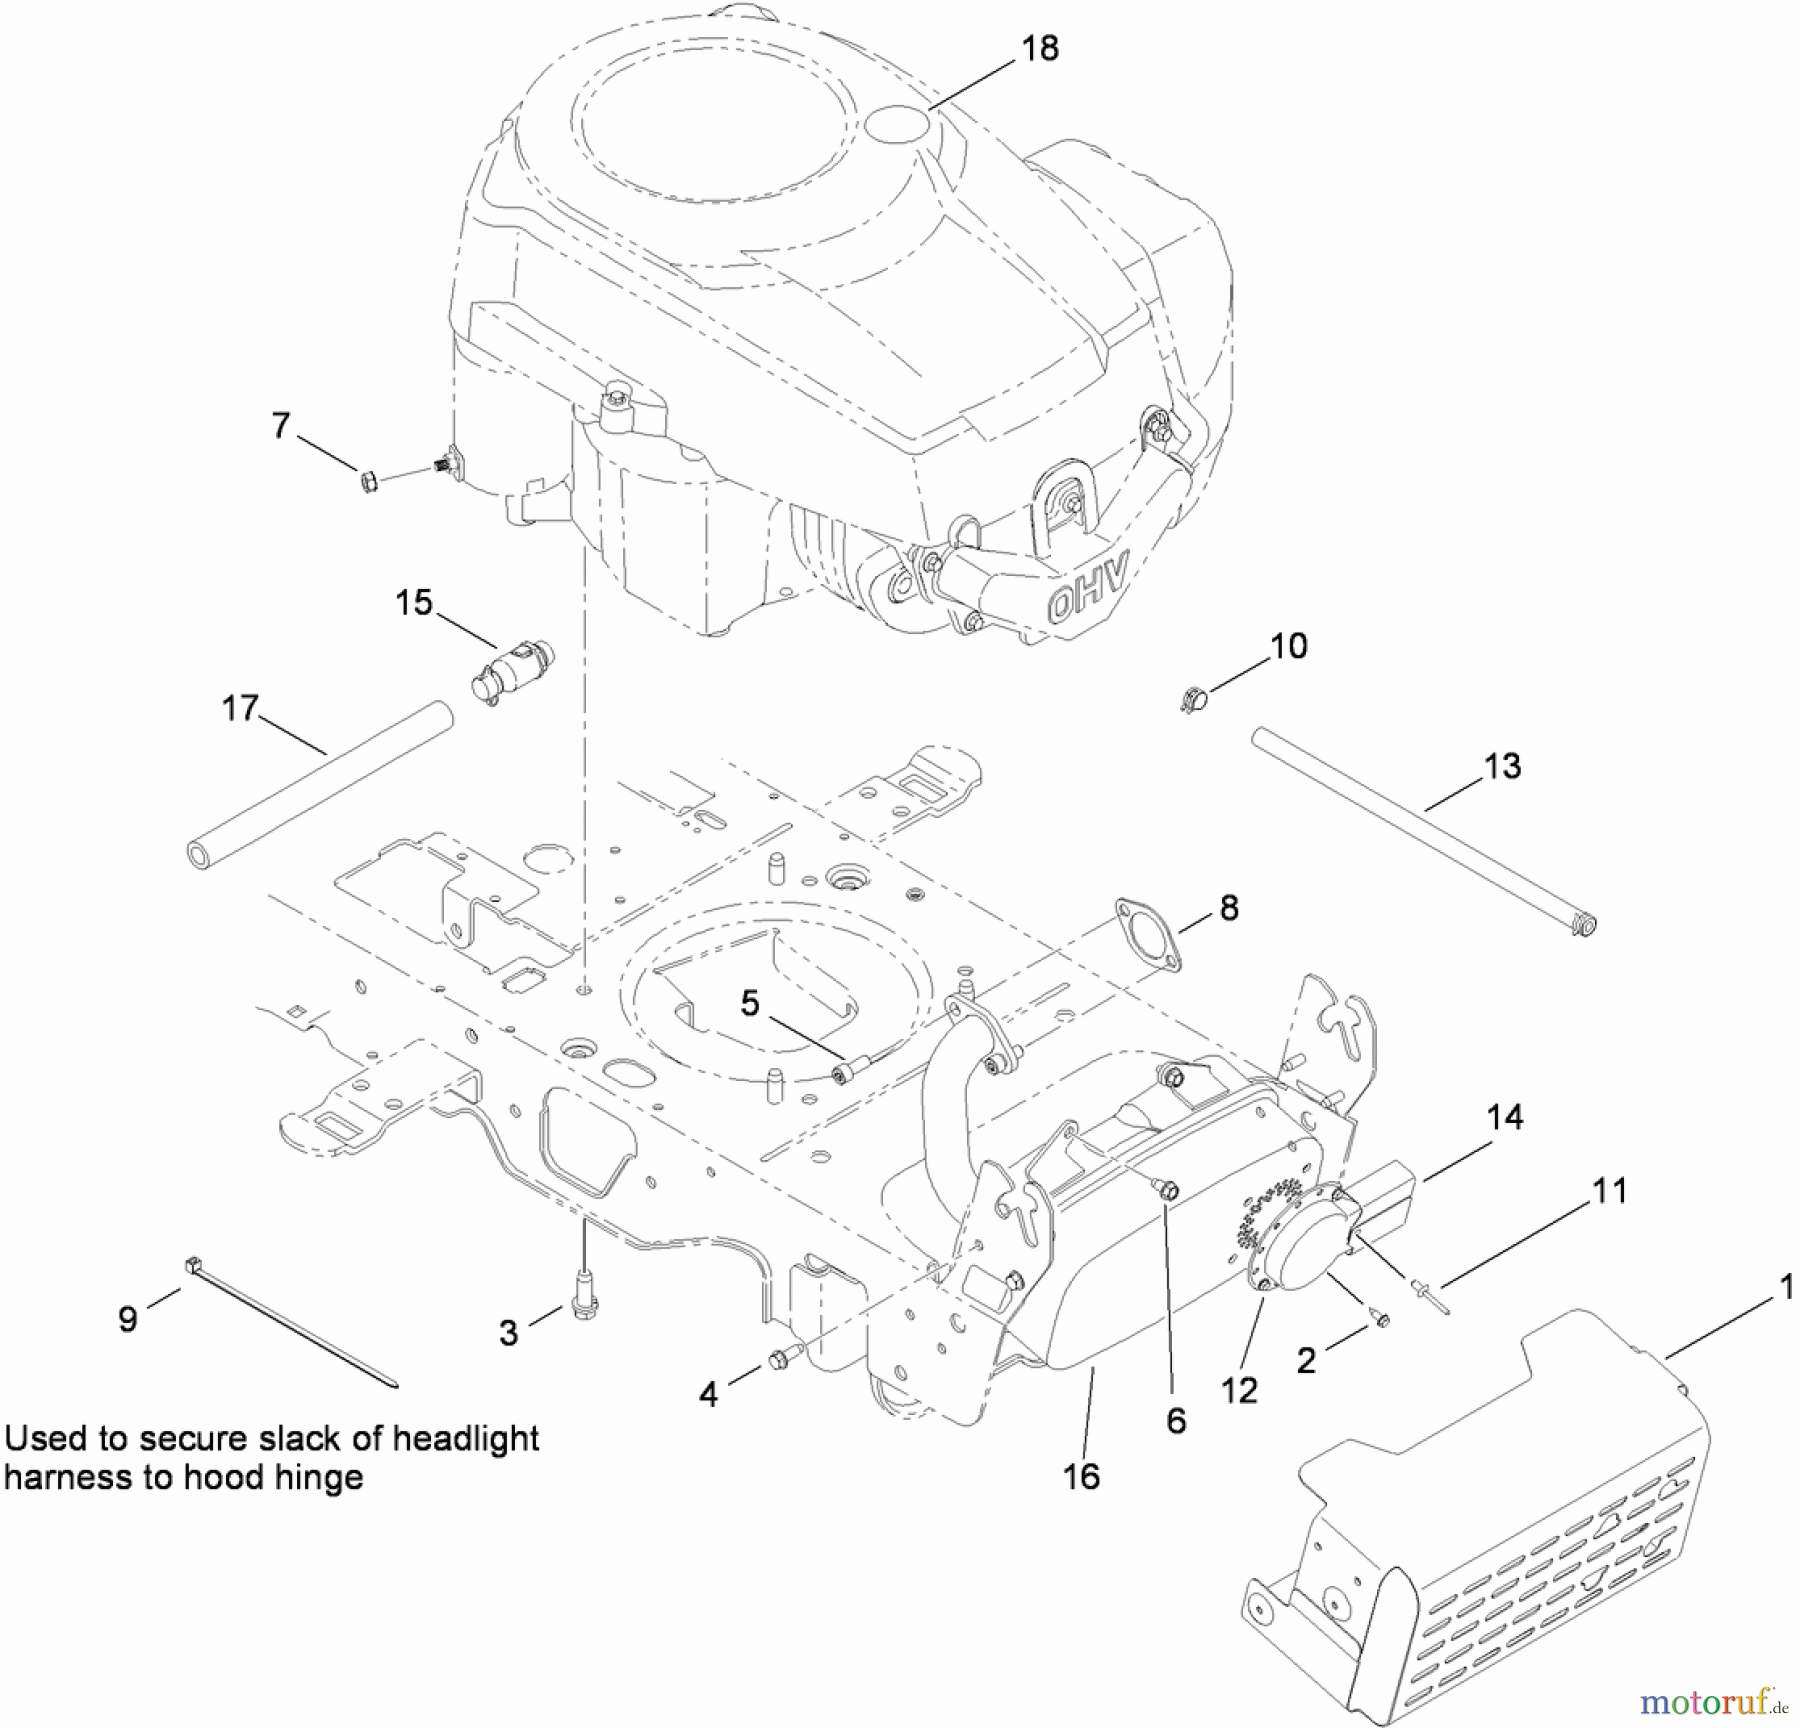  Toro Neu Mowers, Lawn & Garden Tractor Seite 1 13AX91RS848 (LX427) - Toro LX427 Lawn Tractor, 2012 (SN 1-1) MUFFLER AND SHIELD ASSEMBLY